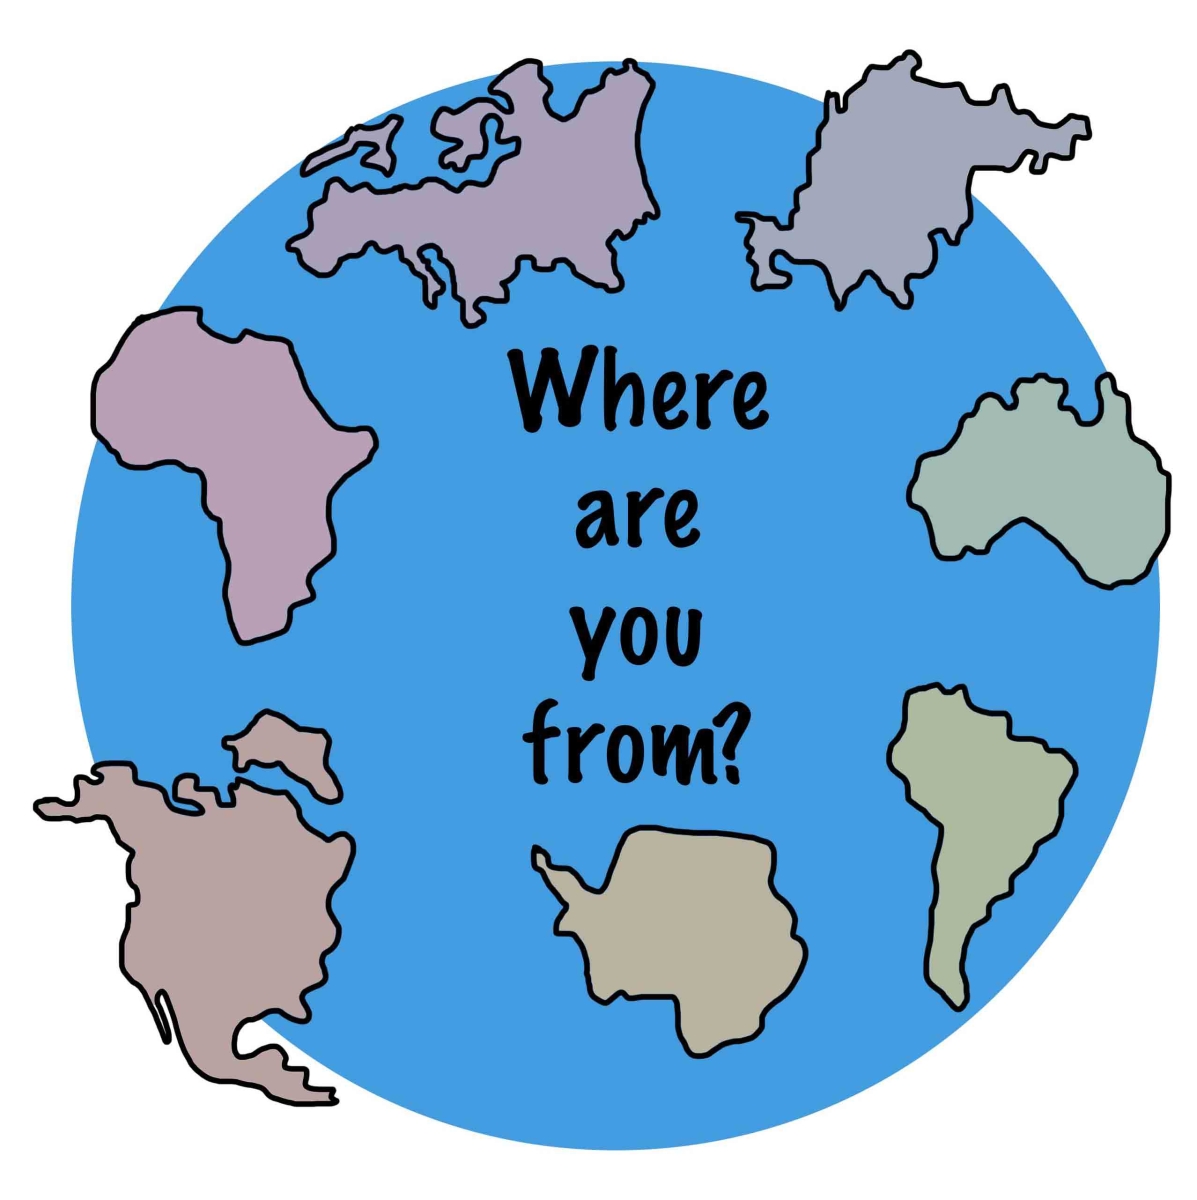 where are you from